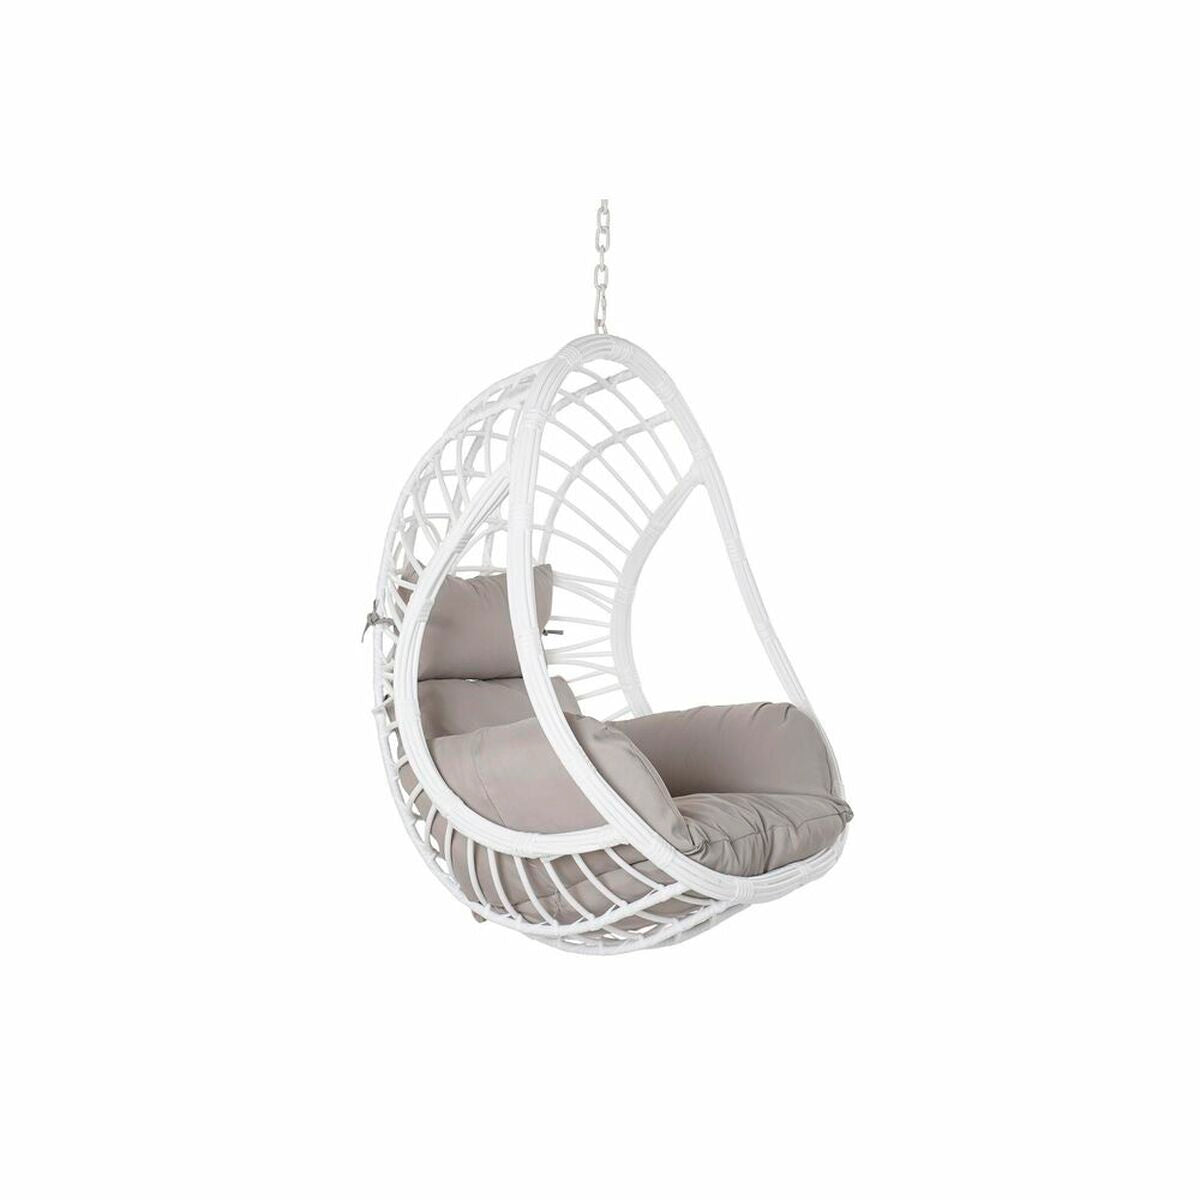 Hanging garden armchair DKD Home Decor 90 x 70 x 110 cm Grey Metal synthetic rattan White